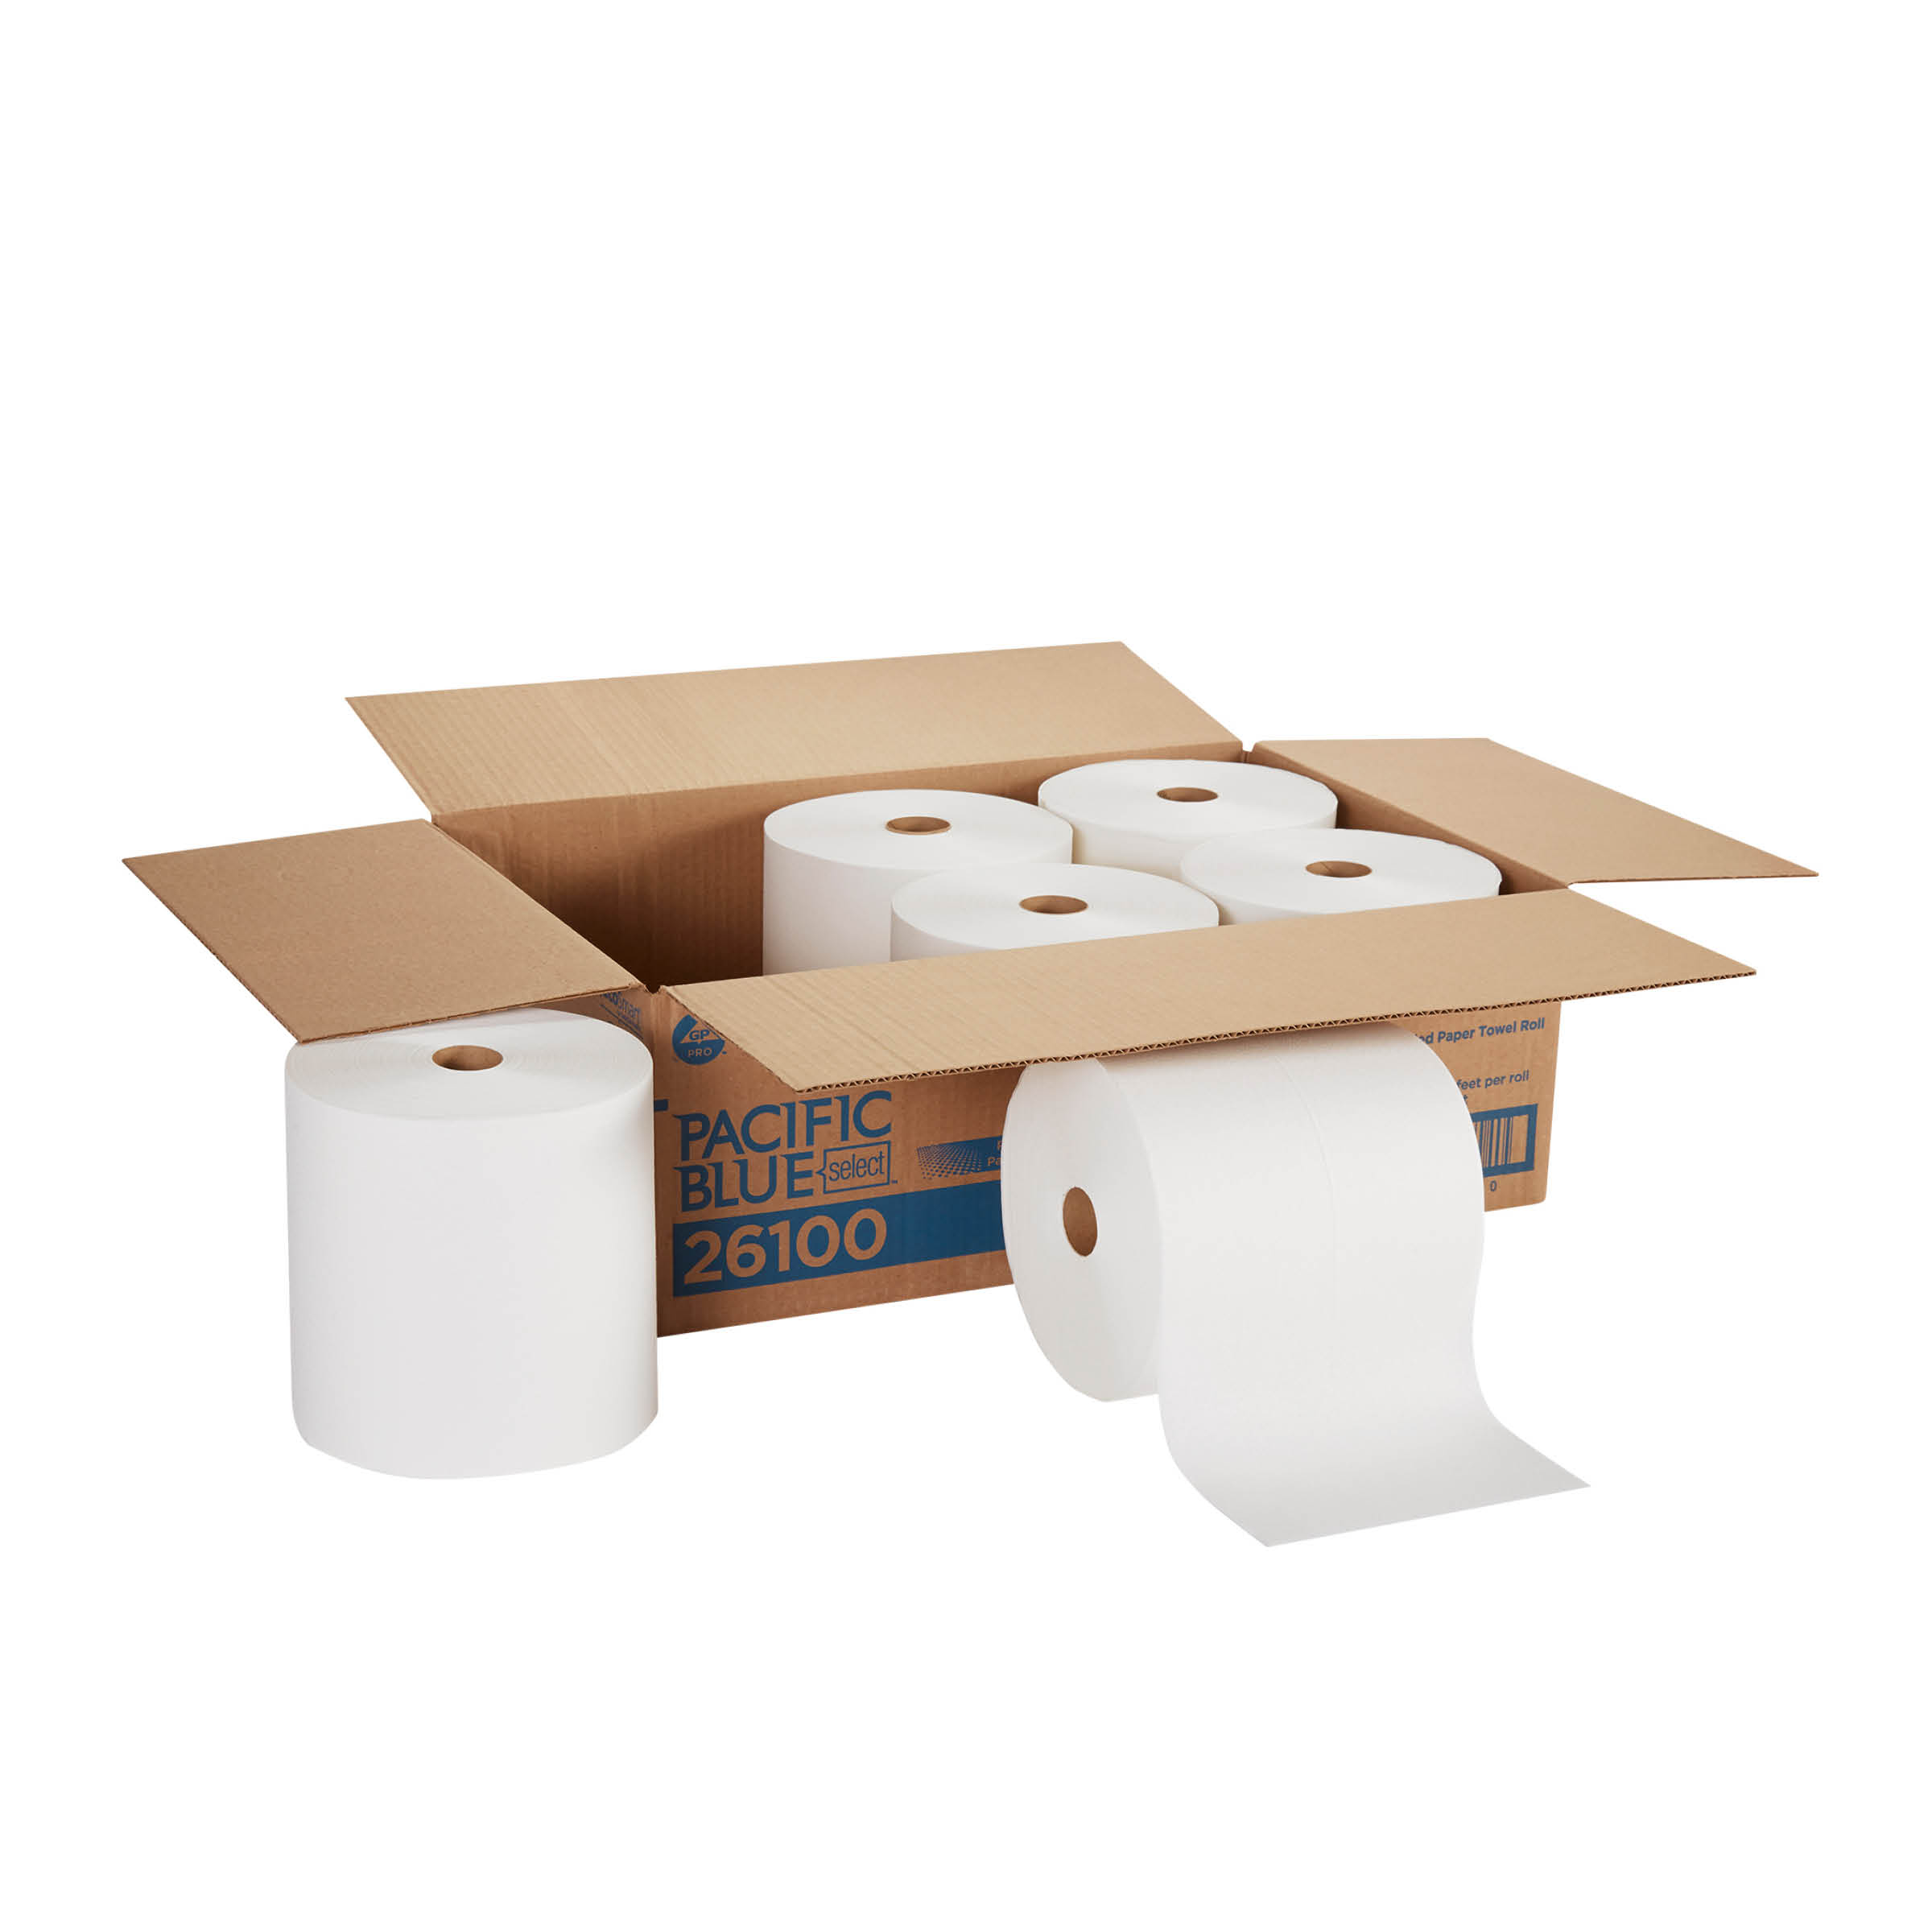 GP PRO Pacific Blue Select Recycled Paper Towel Roll, White, 26100; 1000 Ft/Roll, 6 Rolls/Case